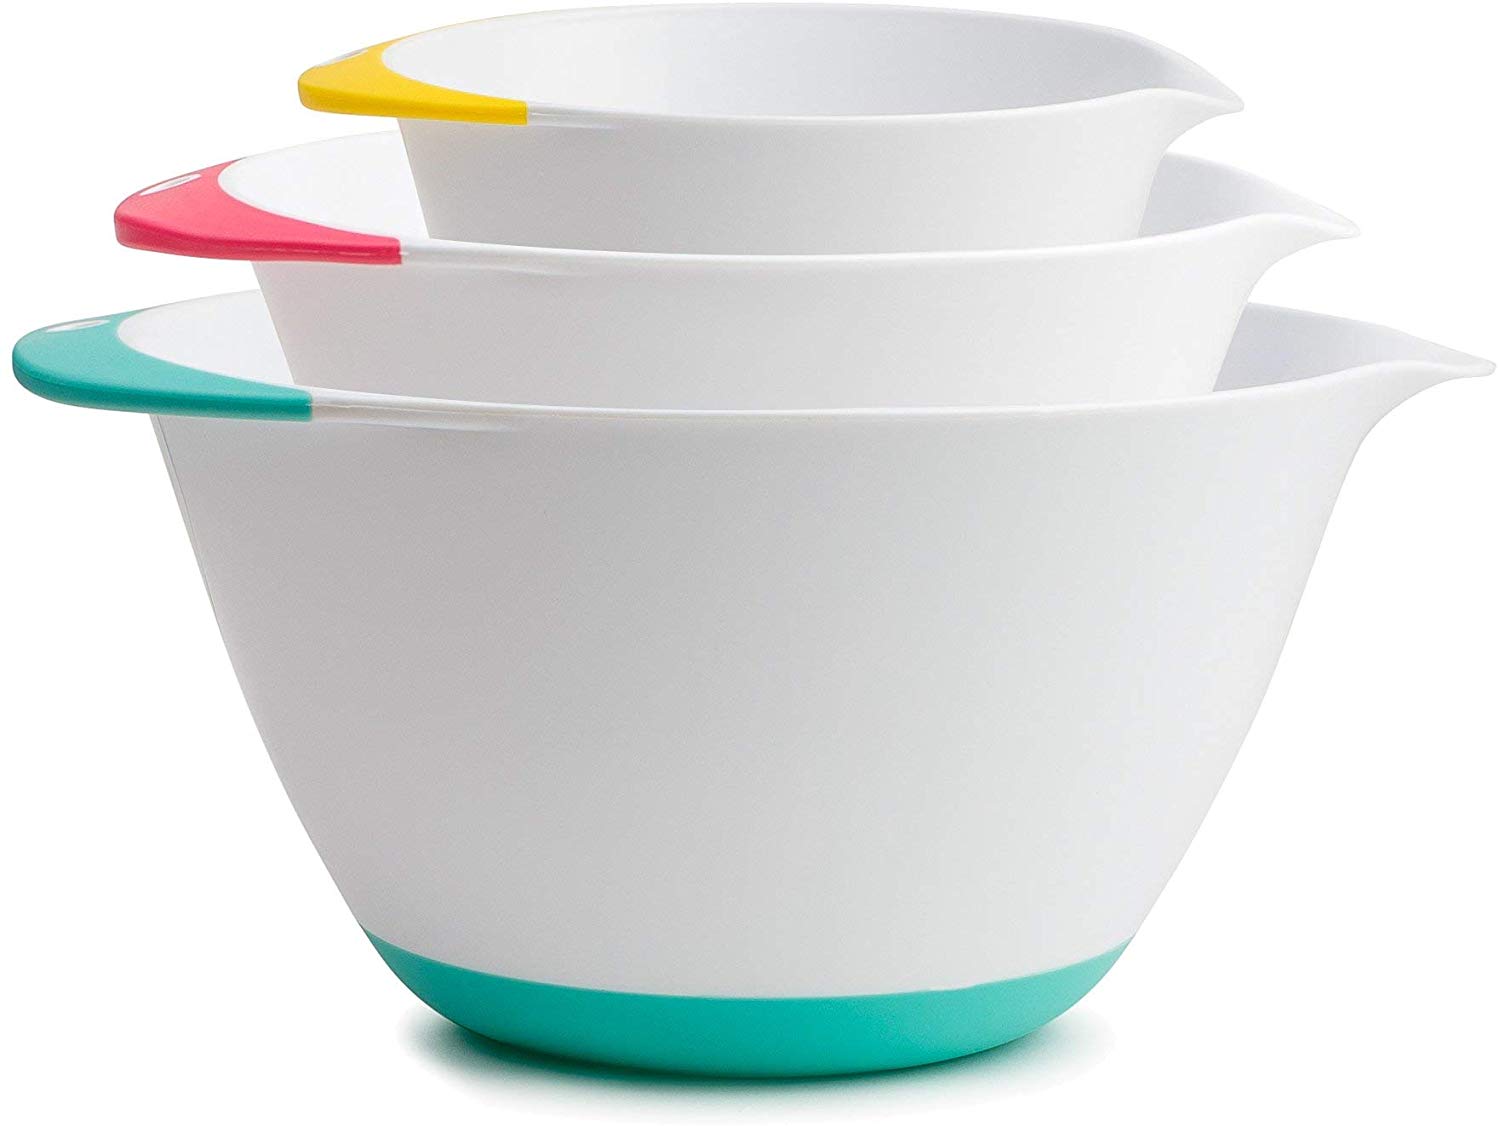 OXO 3-Piece Good Grips Mixing Bowl Set Review - Forbes Vetted